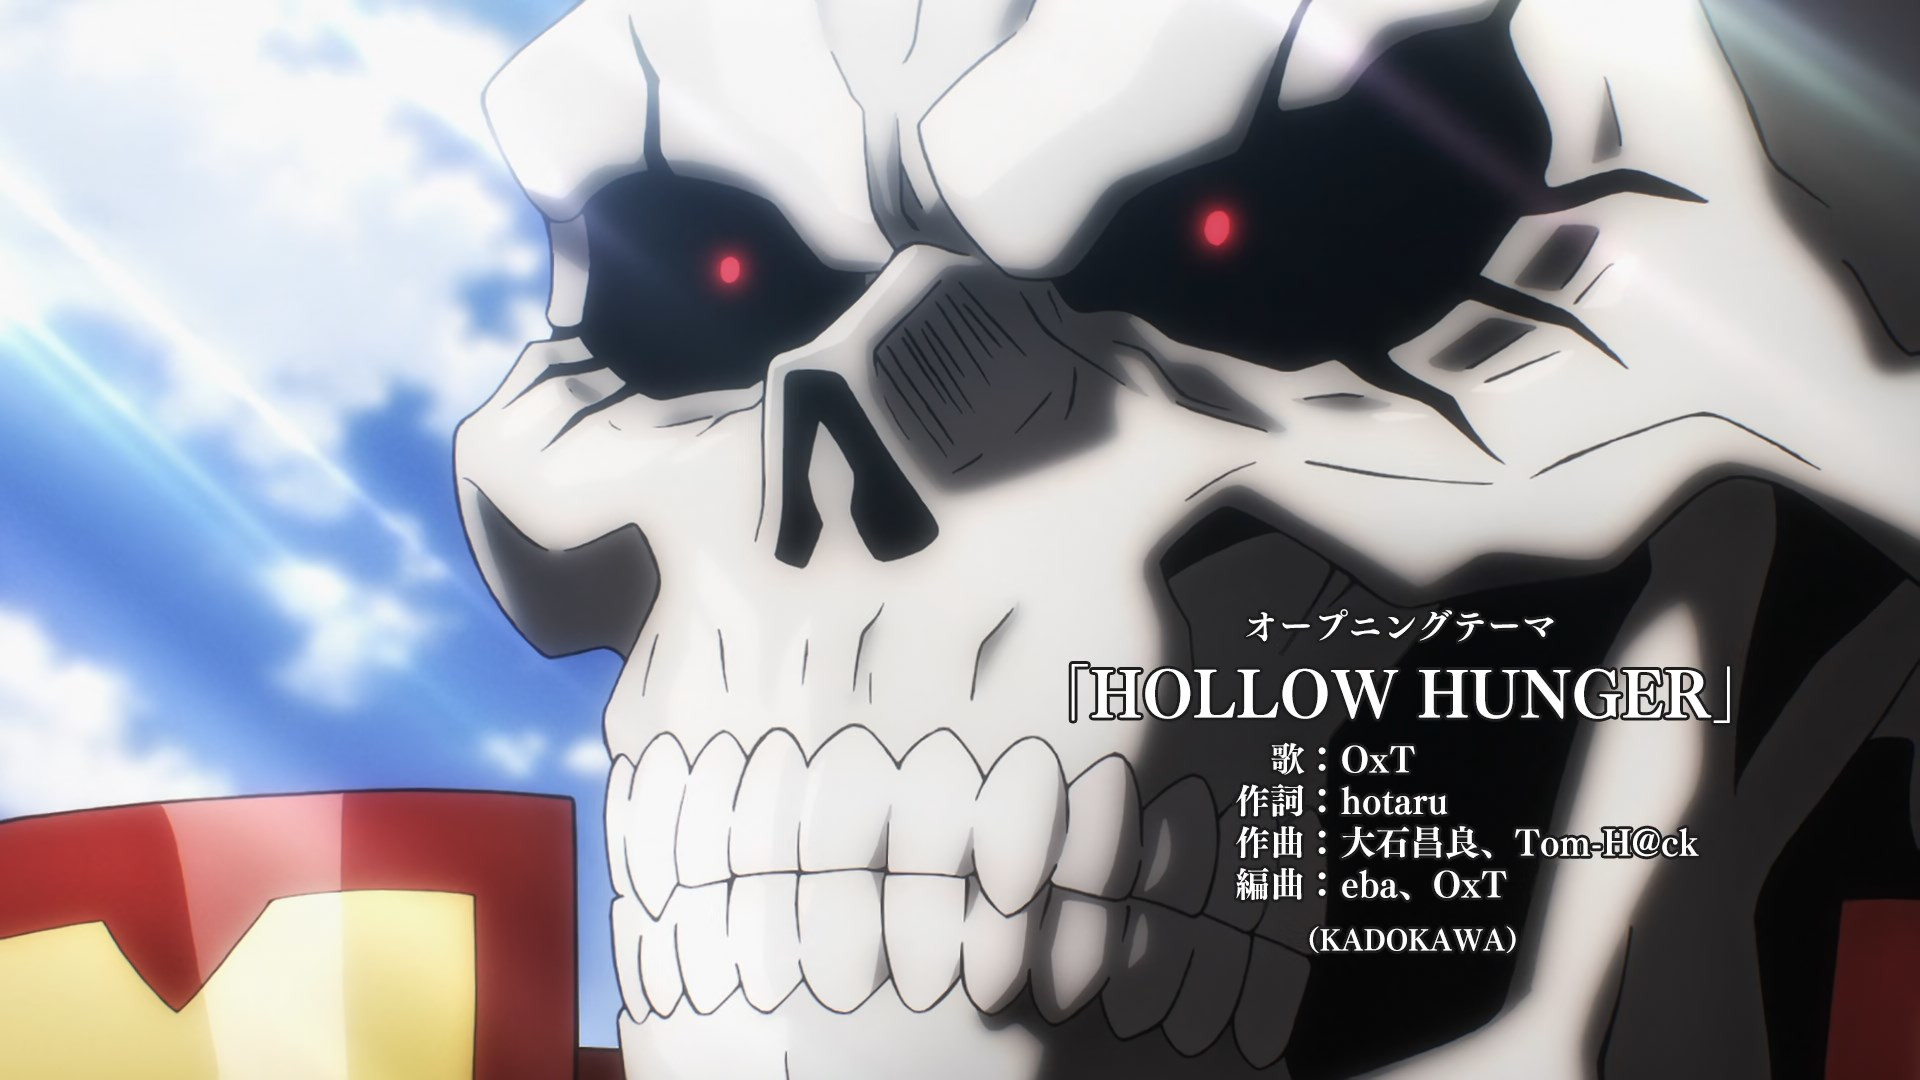 HOLLOW HUNGER · OxT « Overlord IV Season 4 » - playlist by ANIME